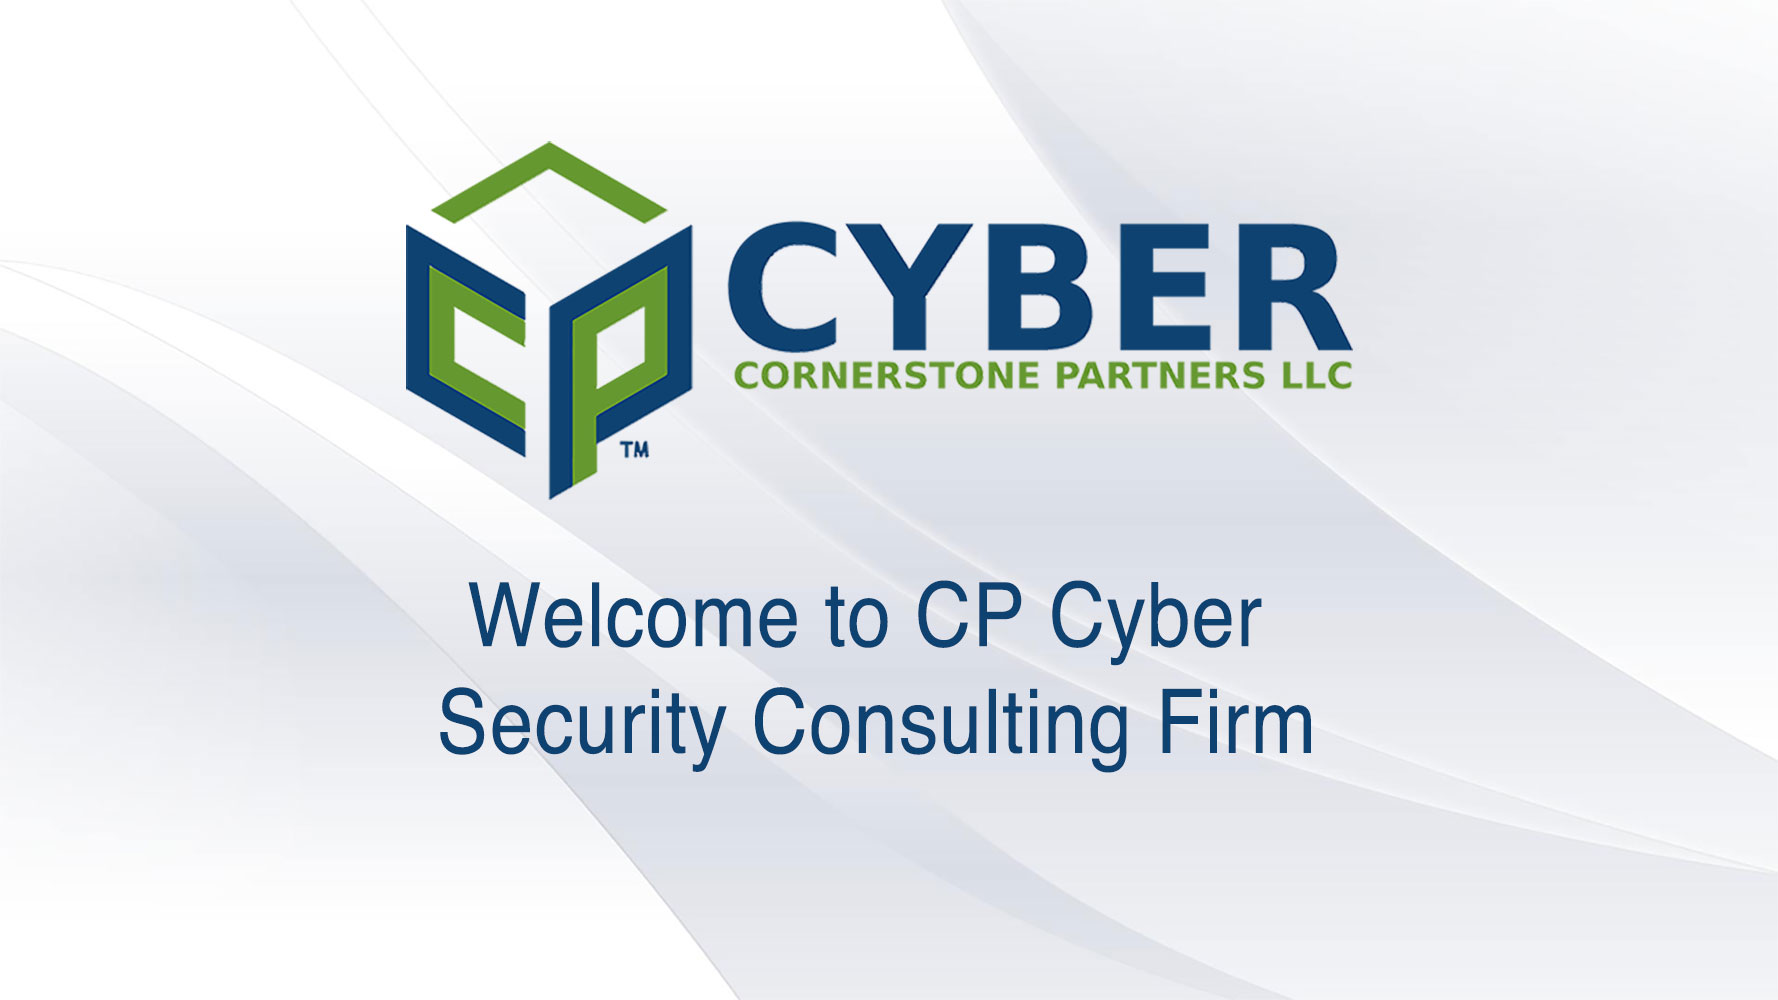 Welcome to CP Cyber Security Consulting and Solutions Firm Denver Colorado